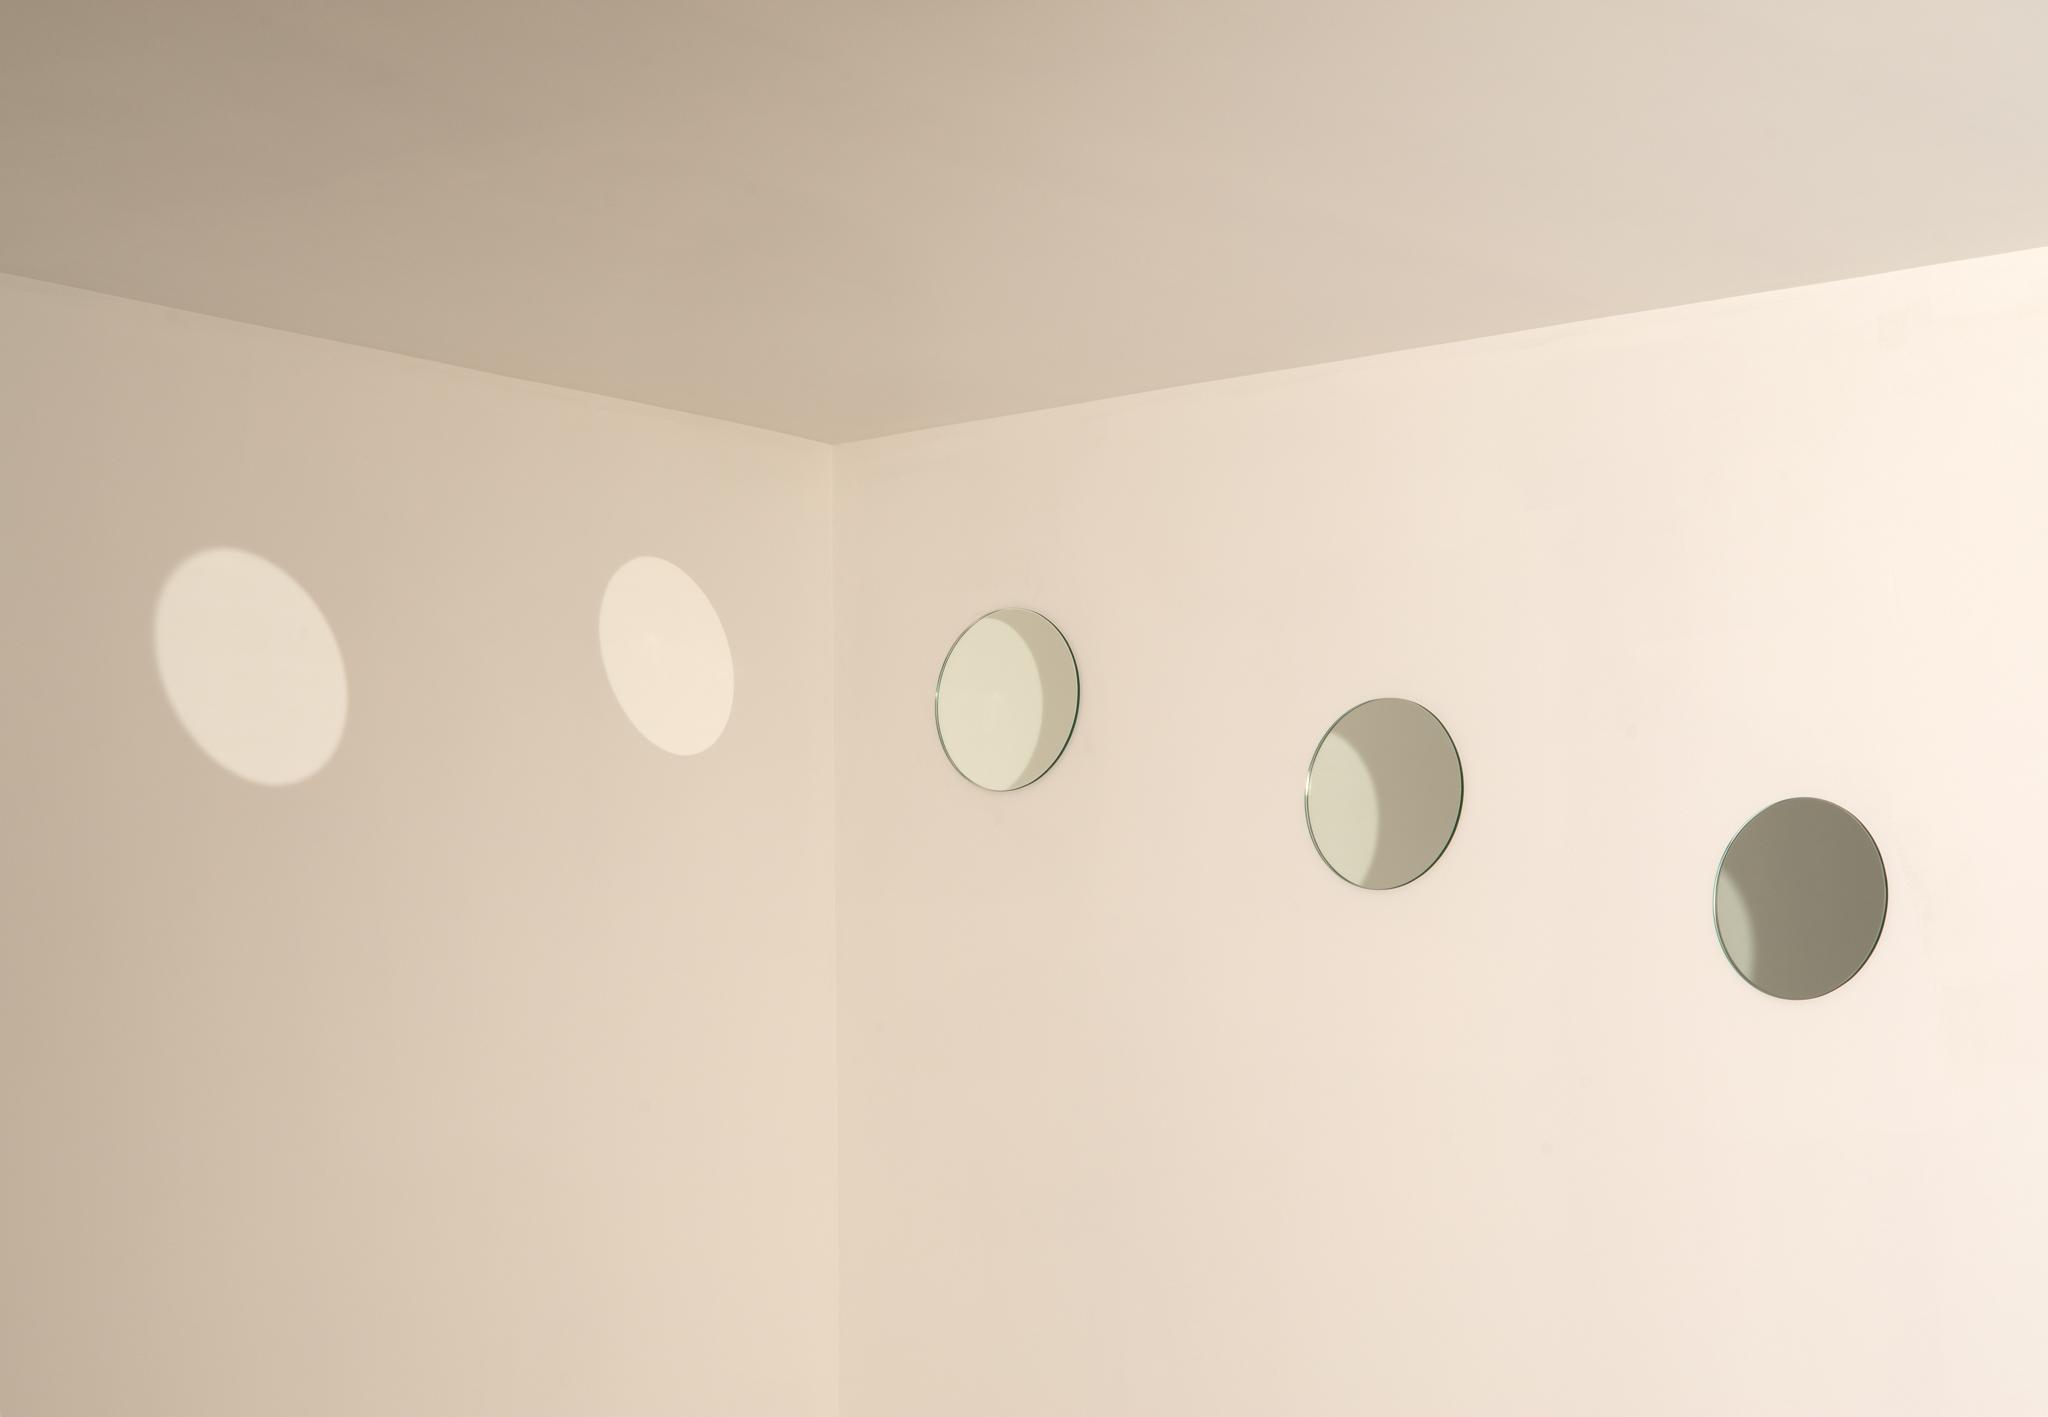 Two white walls meeting a white ceiling with three small round mirrors on the right side and reflected circular light on the left side.